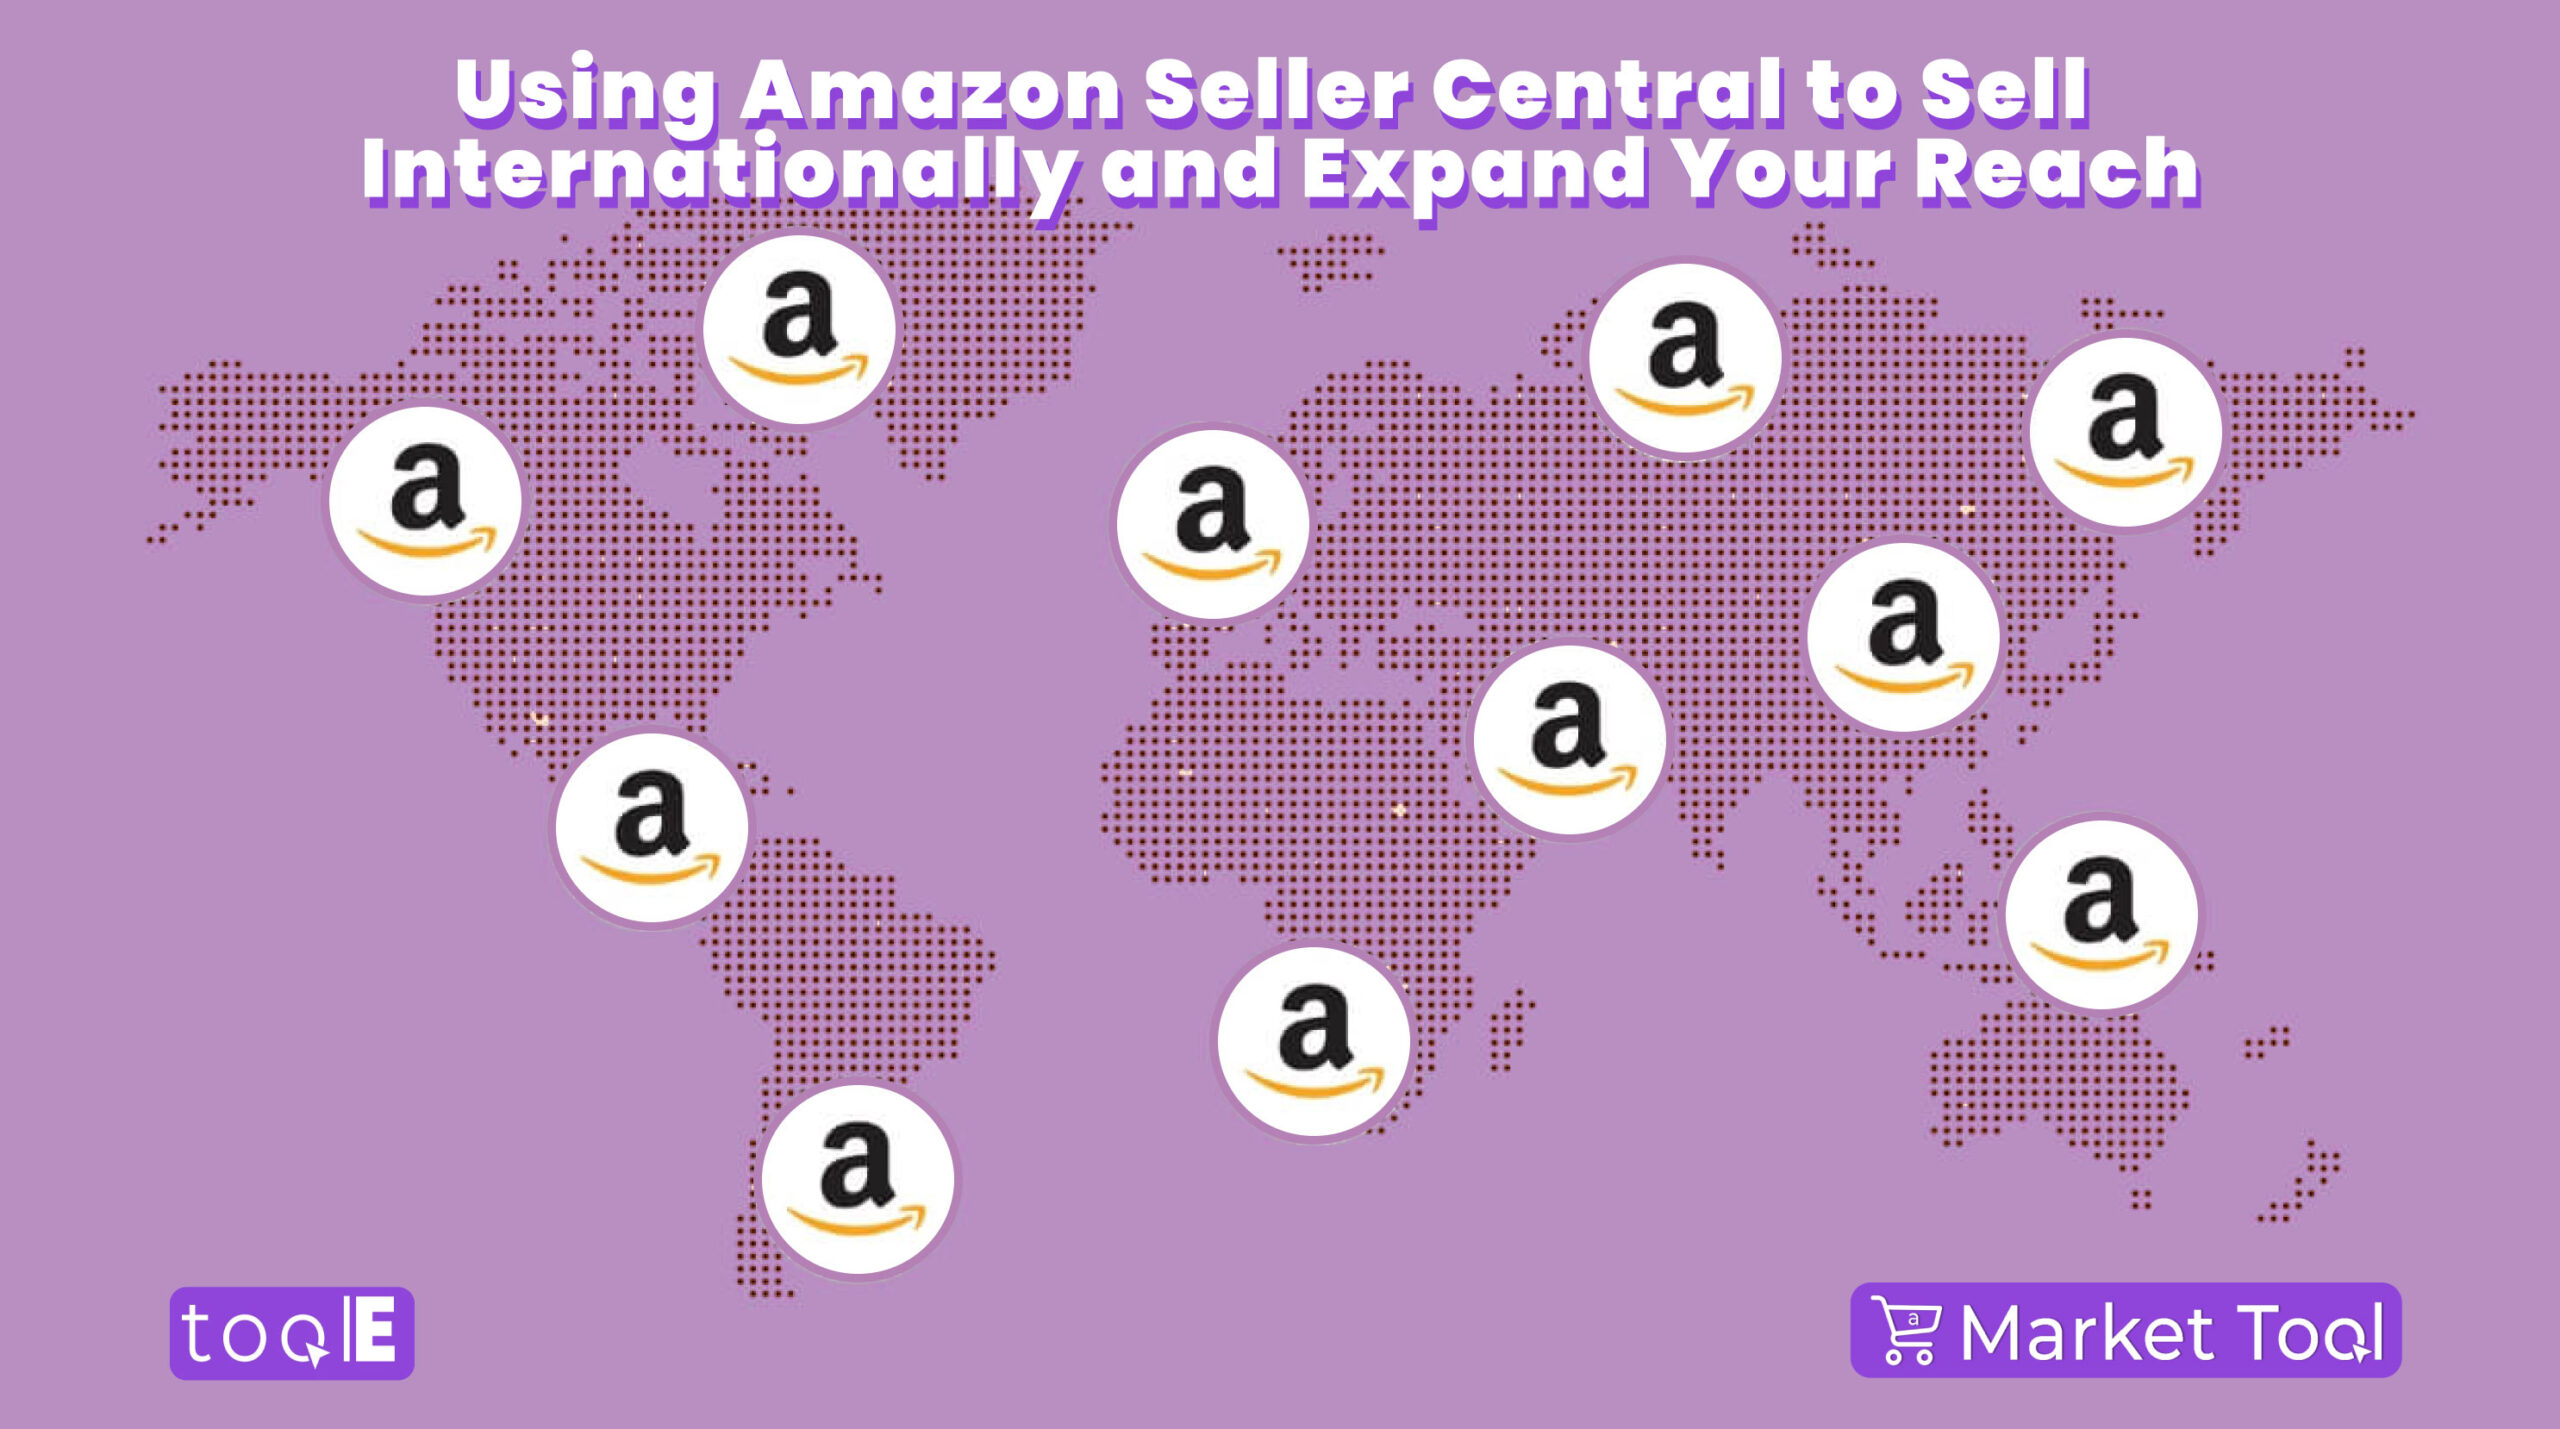 Using Amazon Seller Central to Sell Internationally and Expand Your Reach